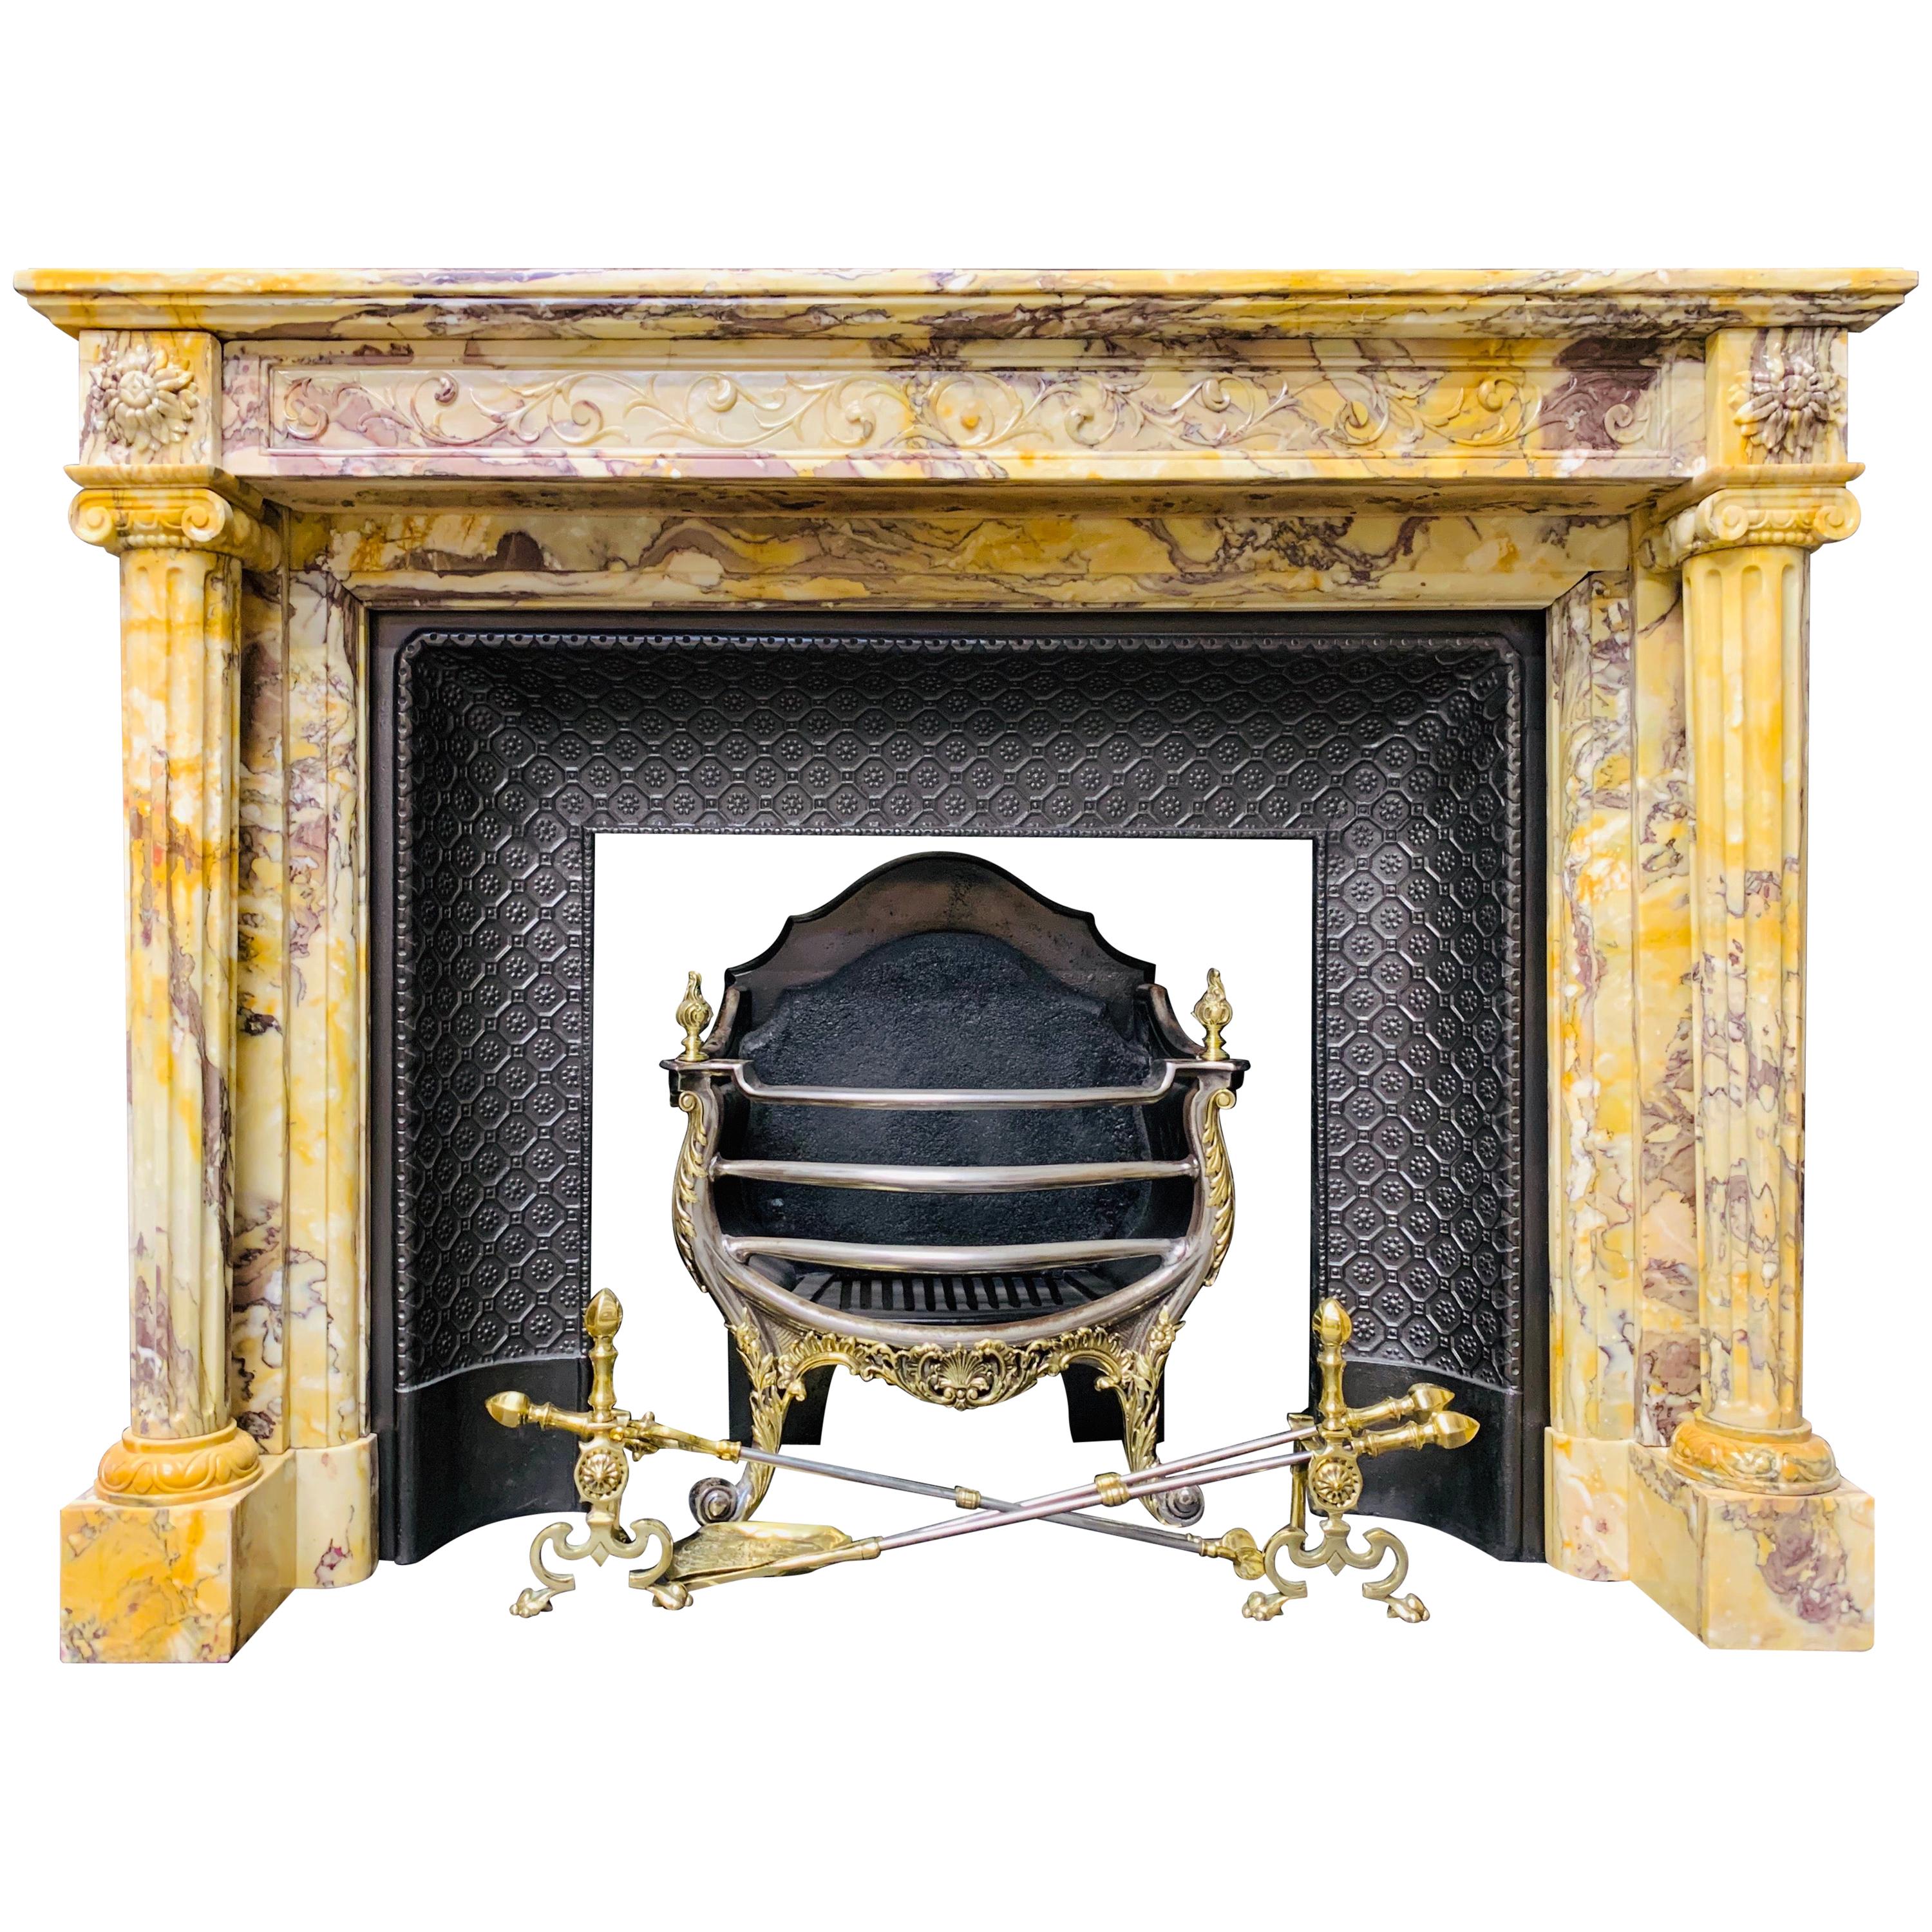 Mid-19th Century French Neoclassical Giallo di Siena Marble Fireplace Surround